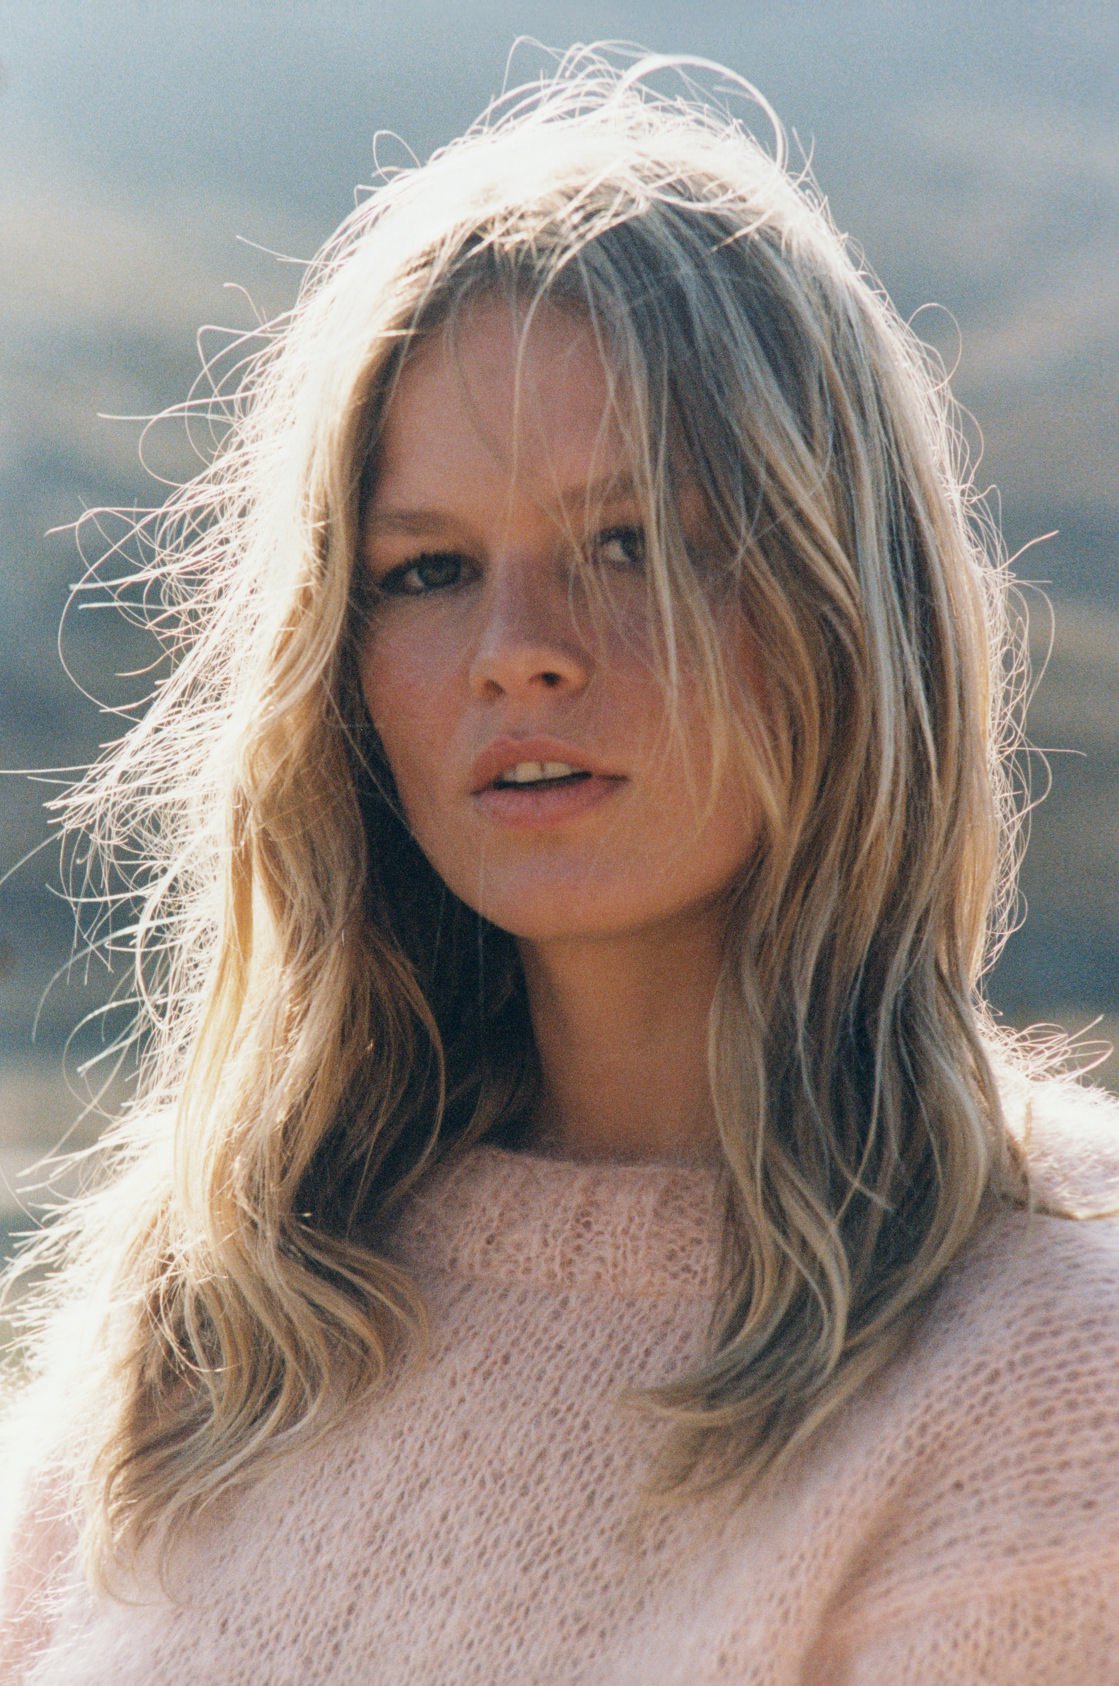 5 things to know about model of the moment, Anna Ewers